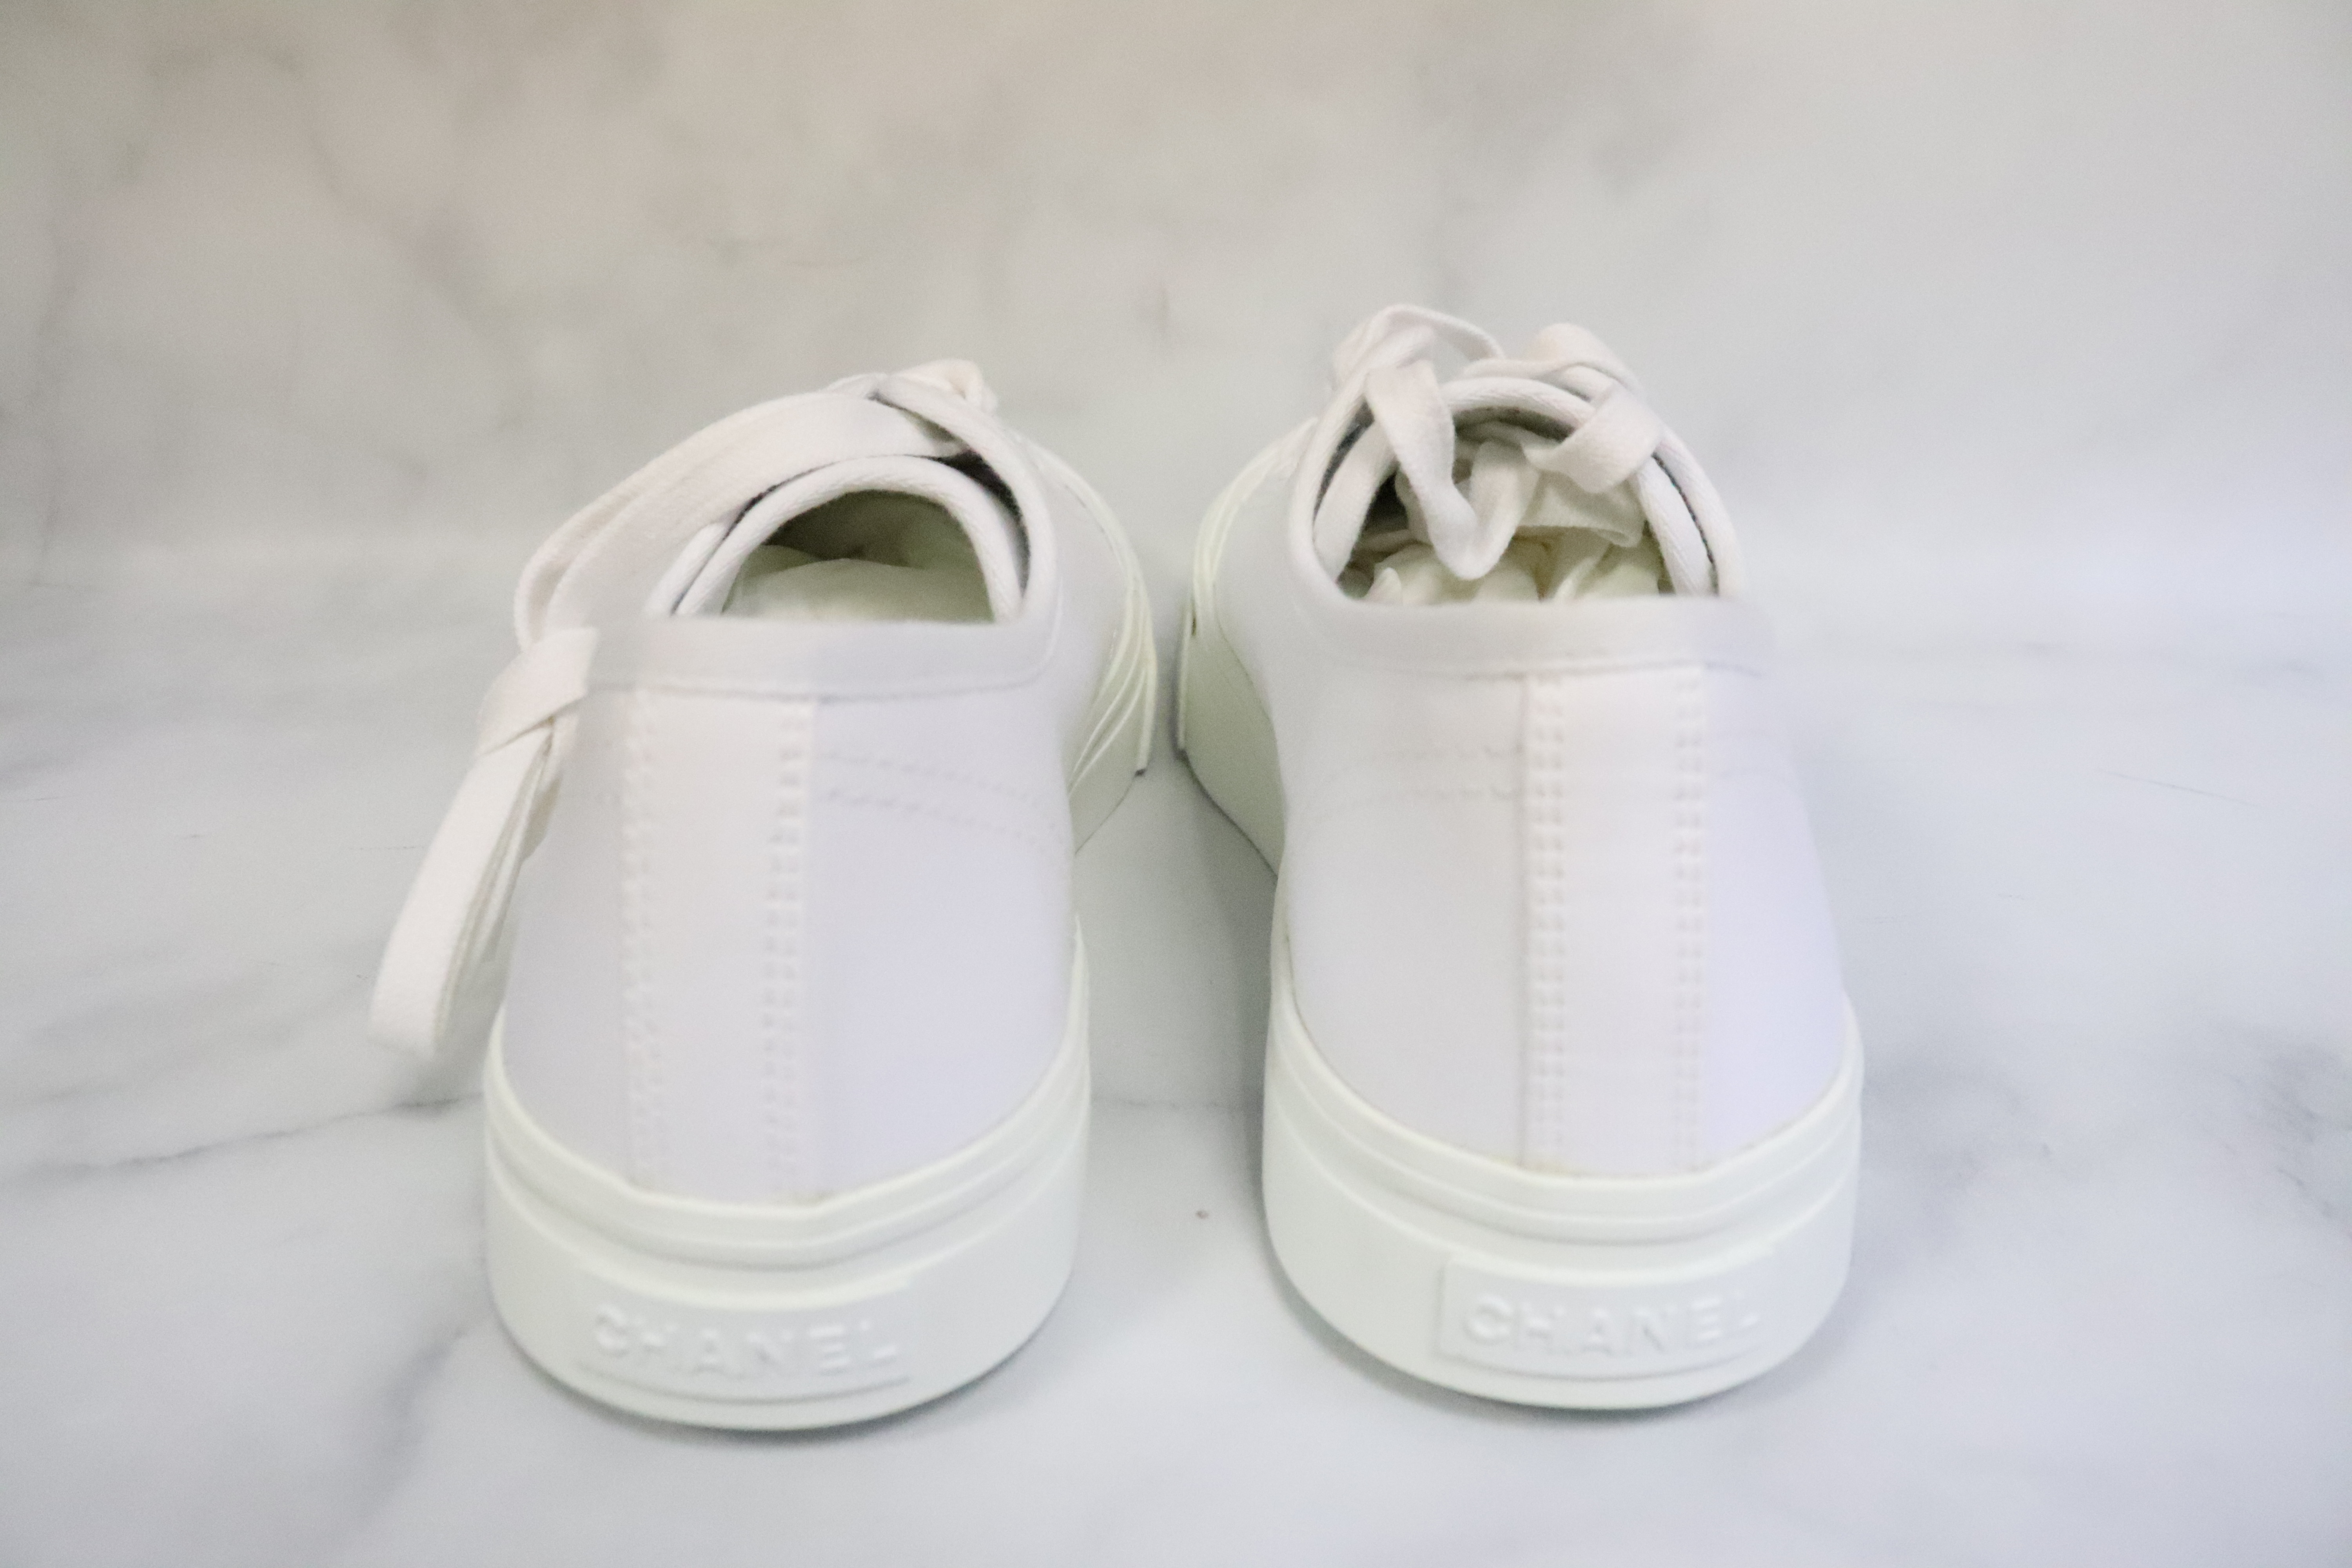 Chanel Shoes Sneakers, White and Black, Size 38.5, New in Box WA001